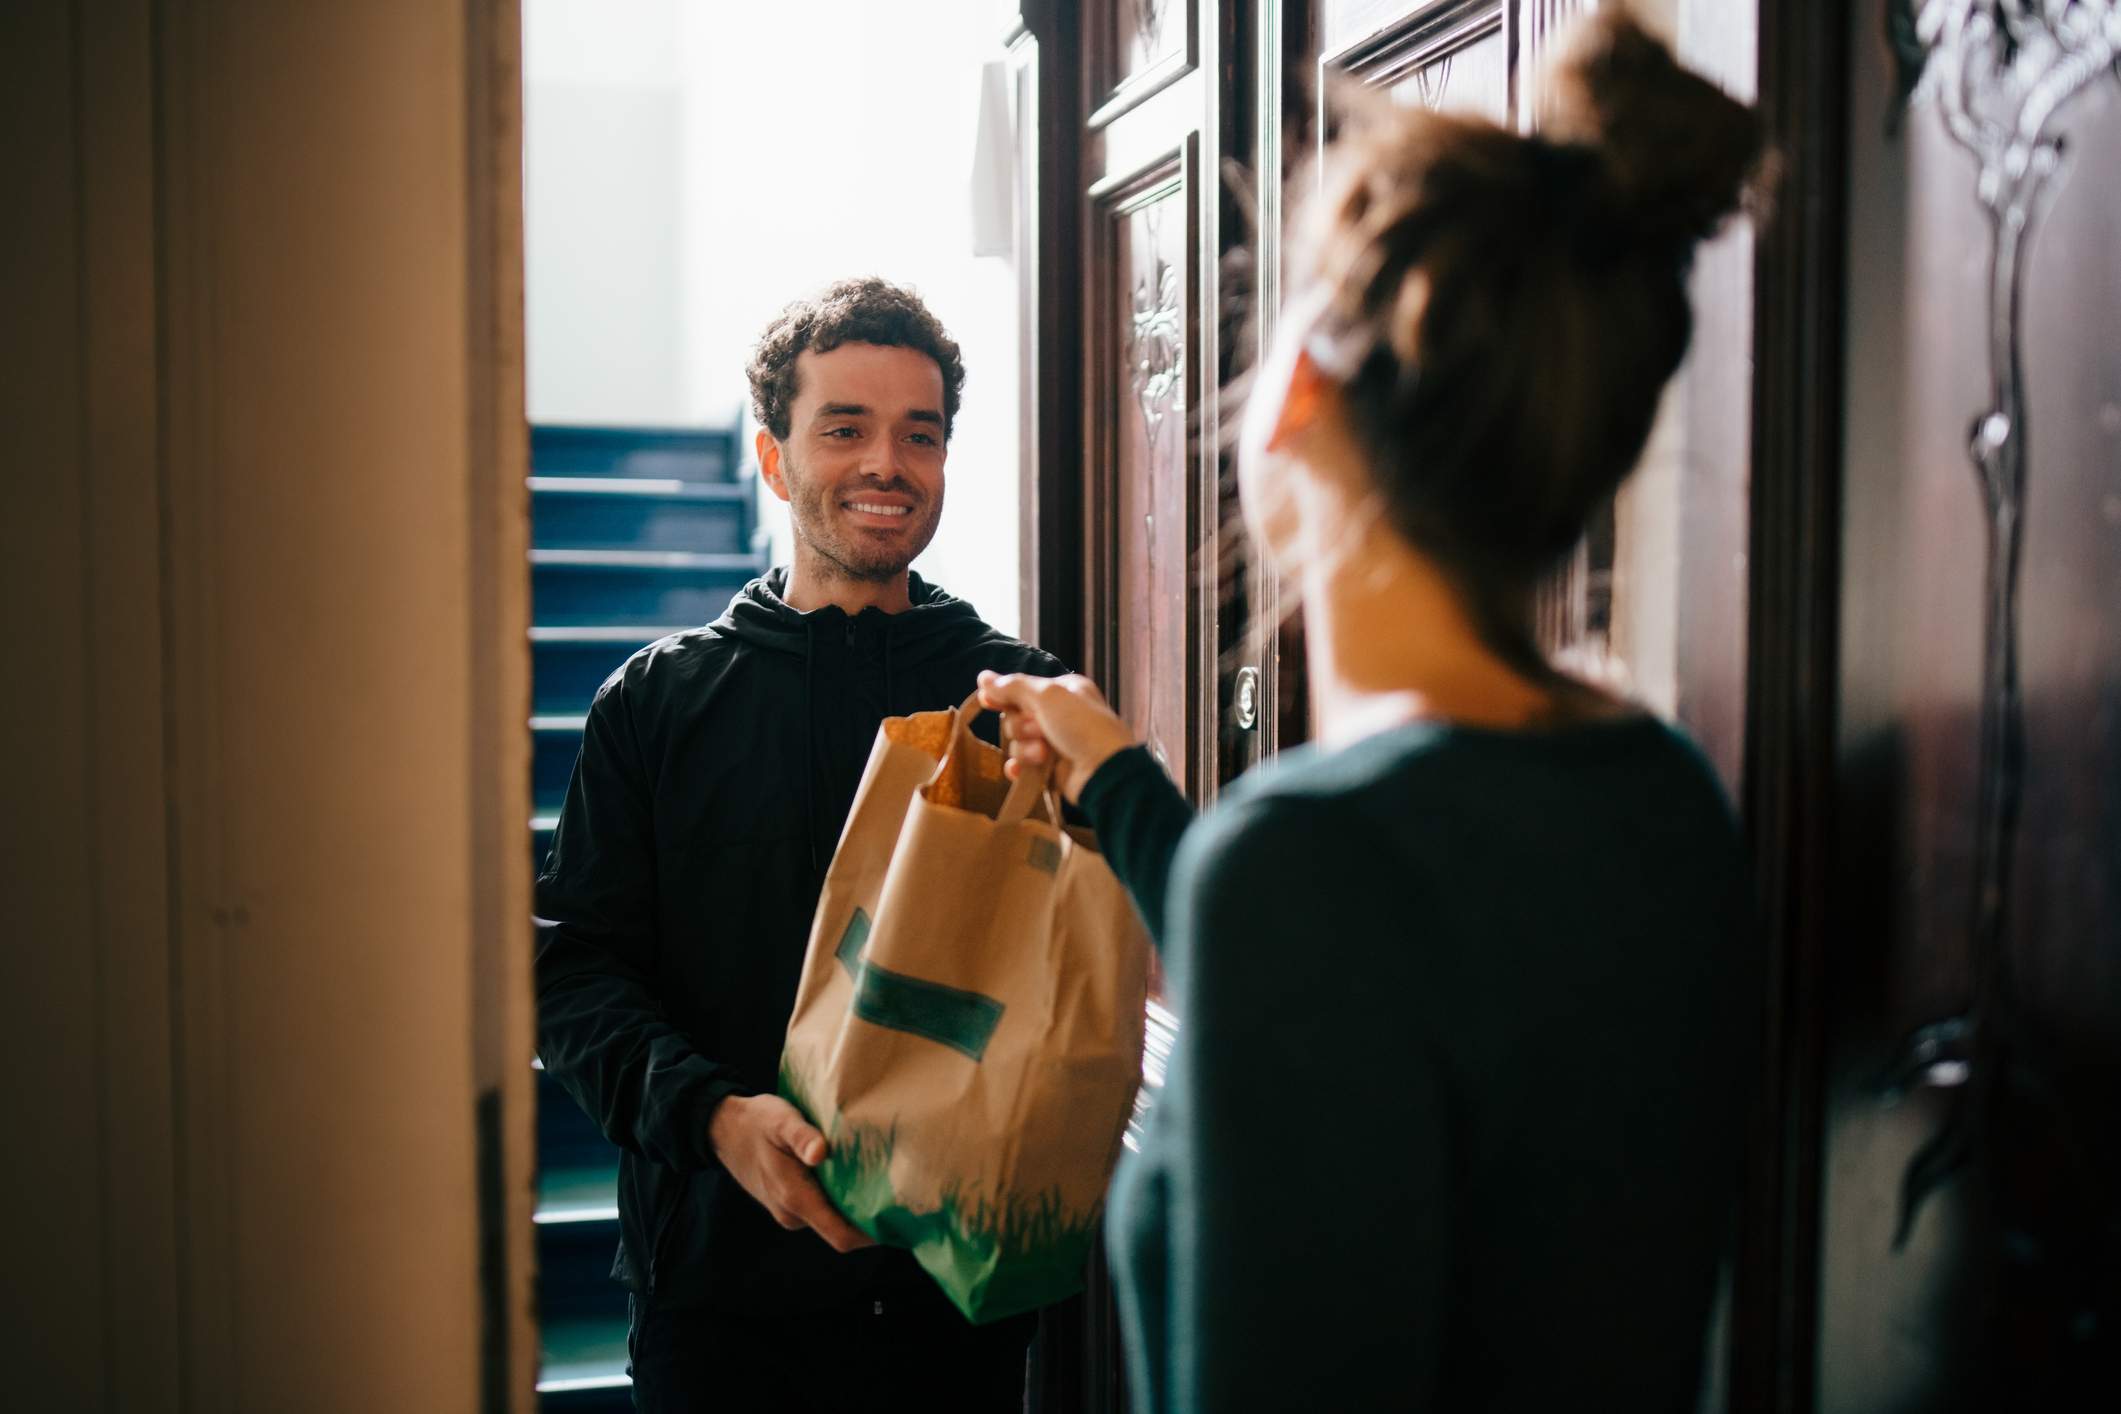 Image depicts a customer accepting food from a delivery driver.